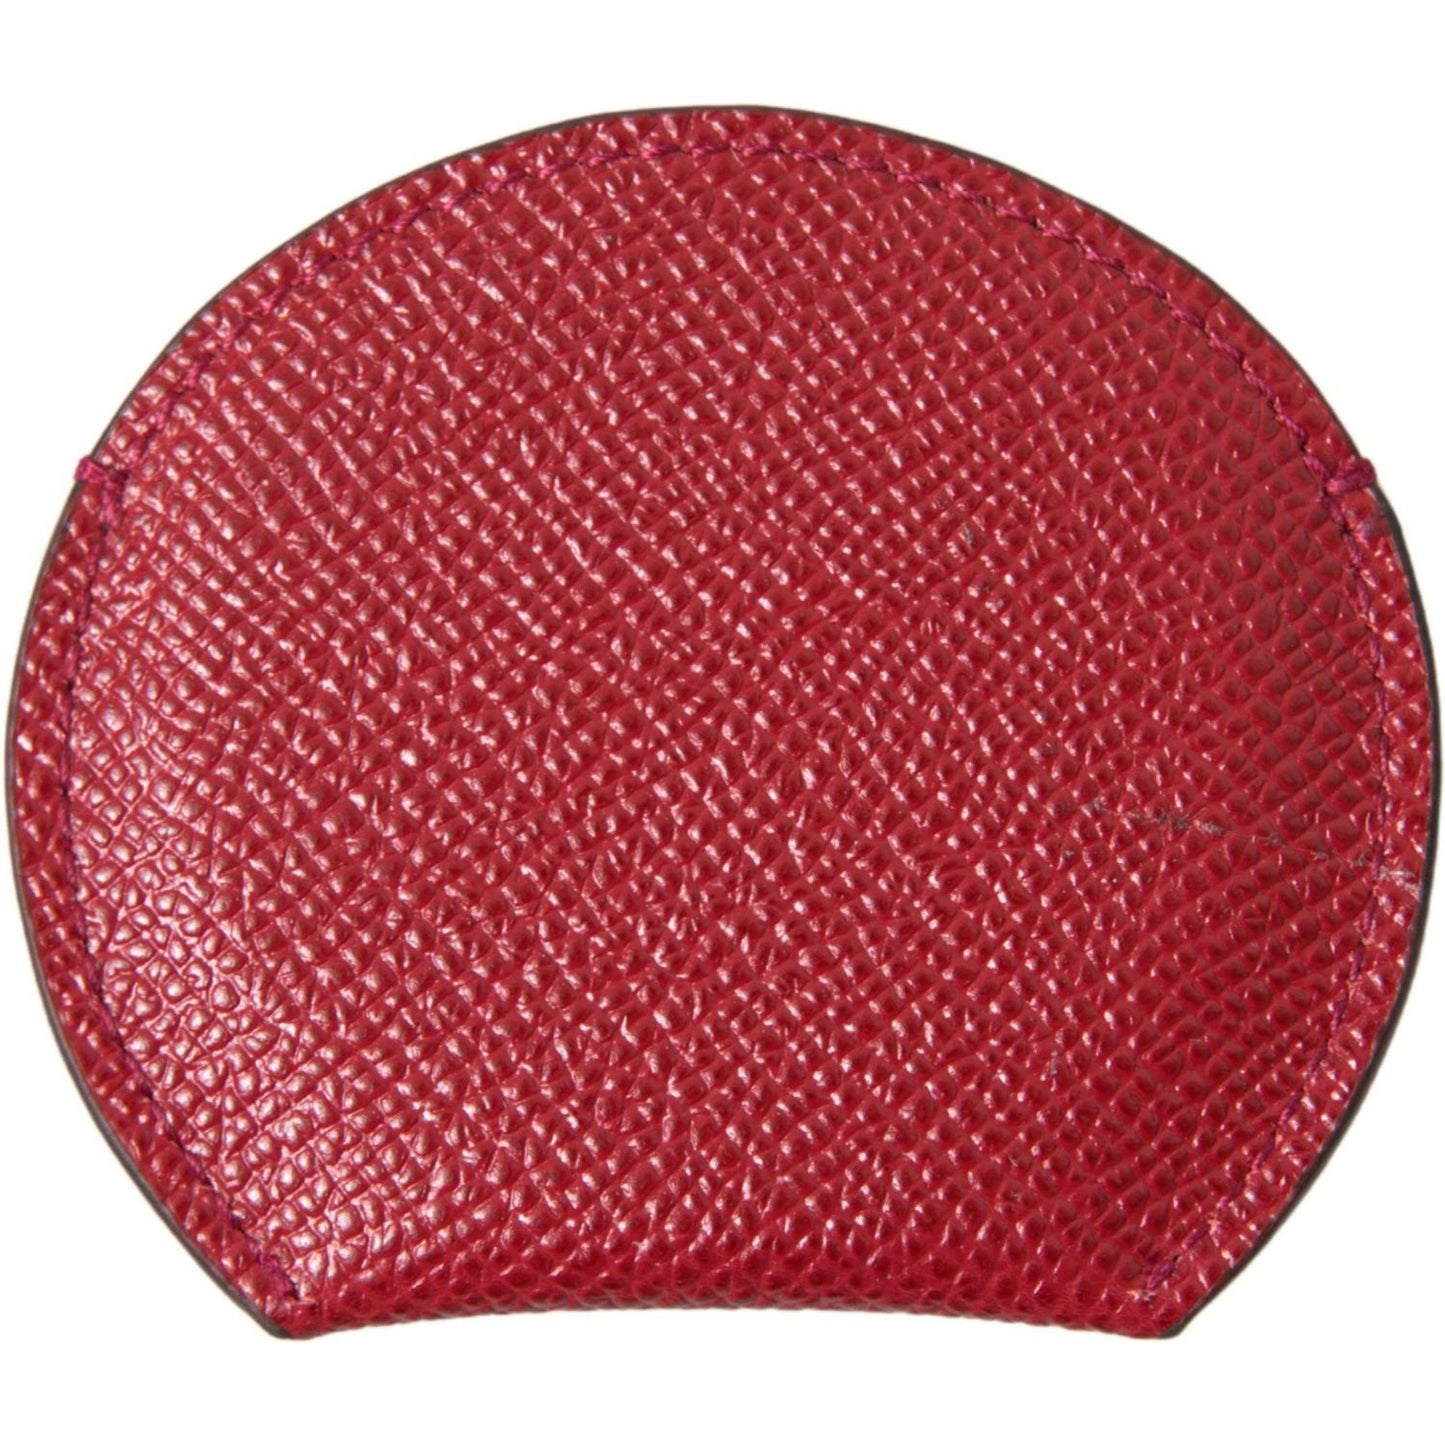 Dolce & Gabbana Chic Red Leather Hand Mirror Holder red-calfskin-leather-round-hand-mirror-holder